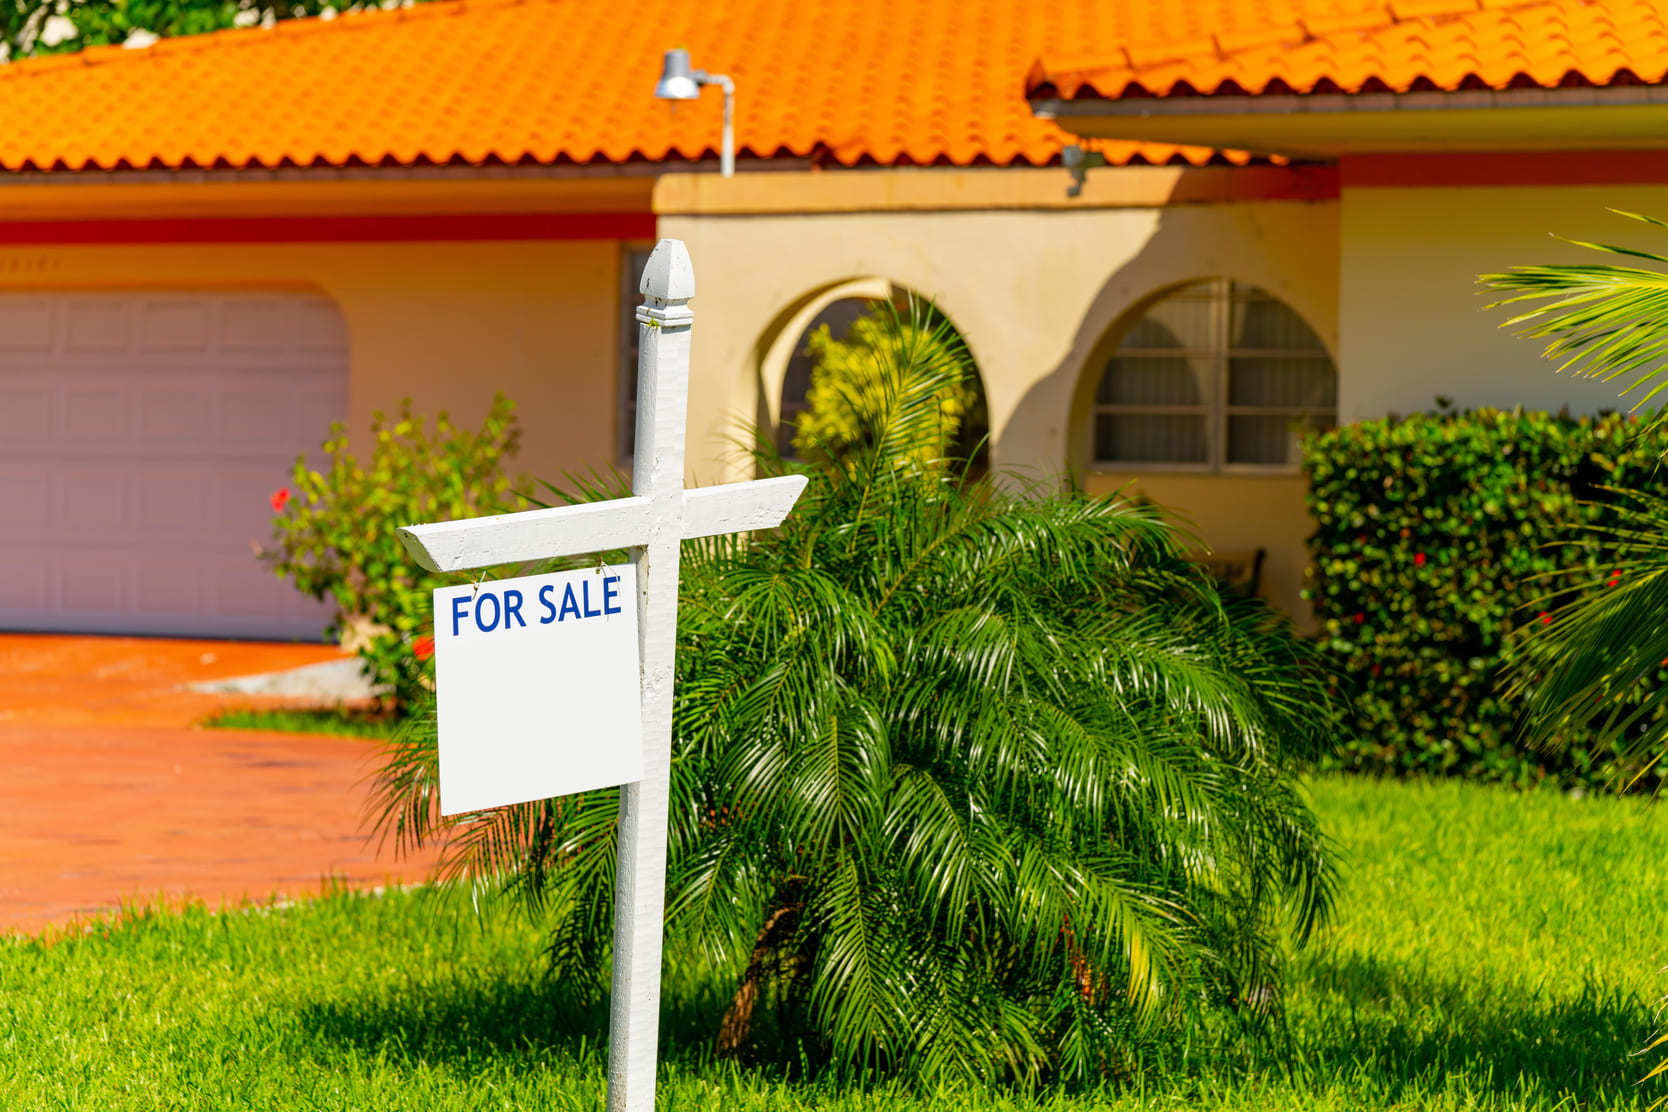 Home for sale in Florida with a for sale sign on the lawn.